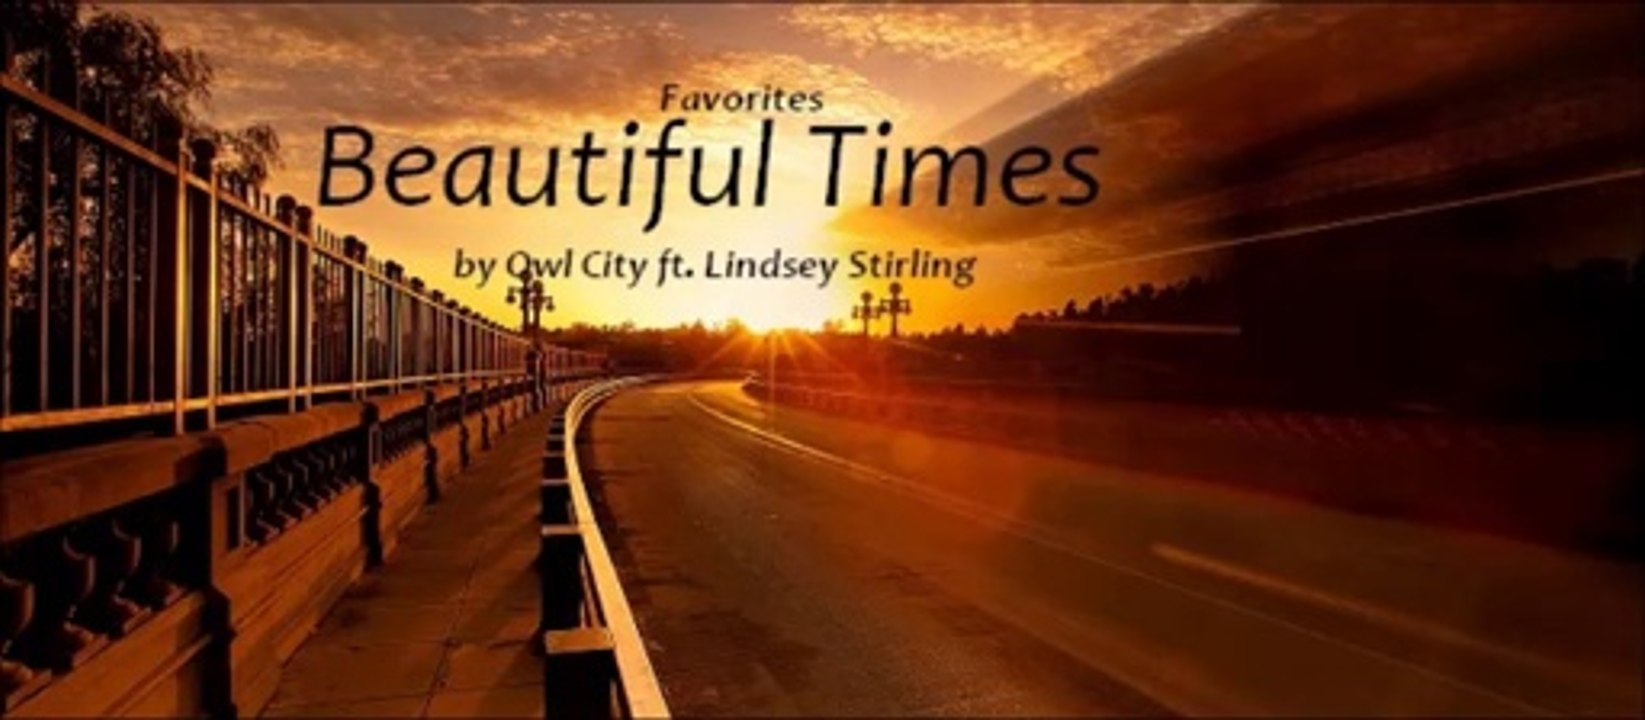 Beautiful Times by Owl City ft. Lindsey Stirling (Favorites)